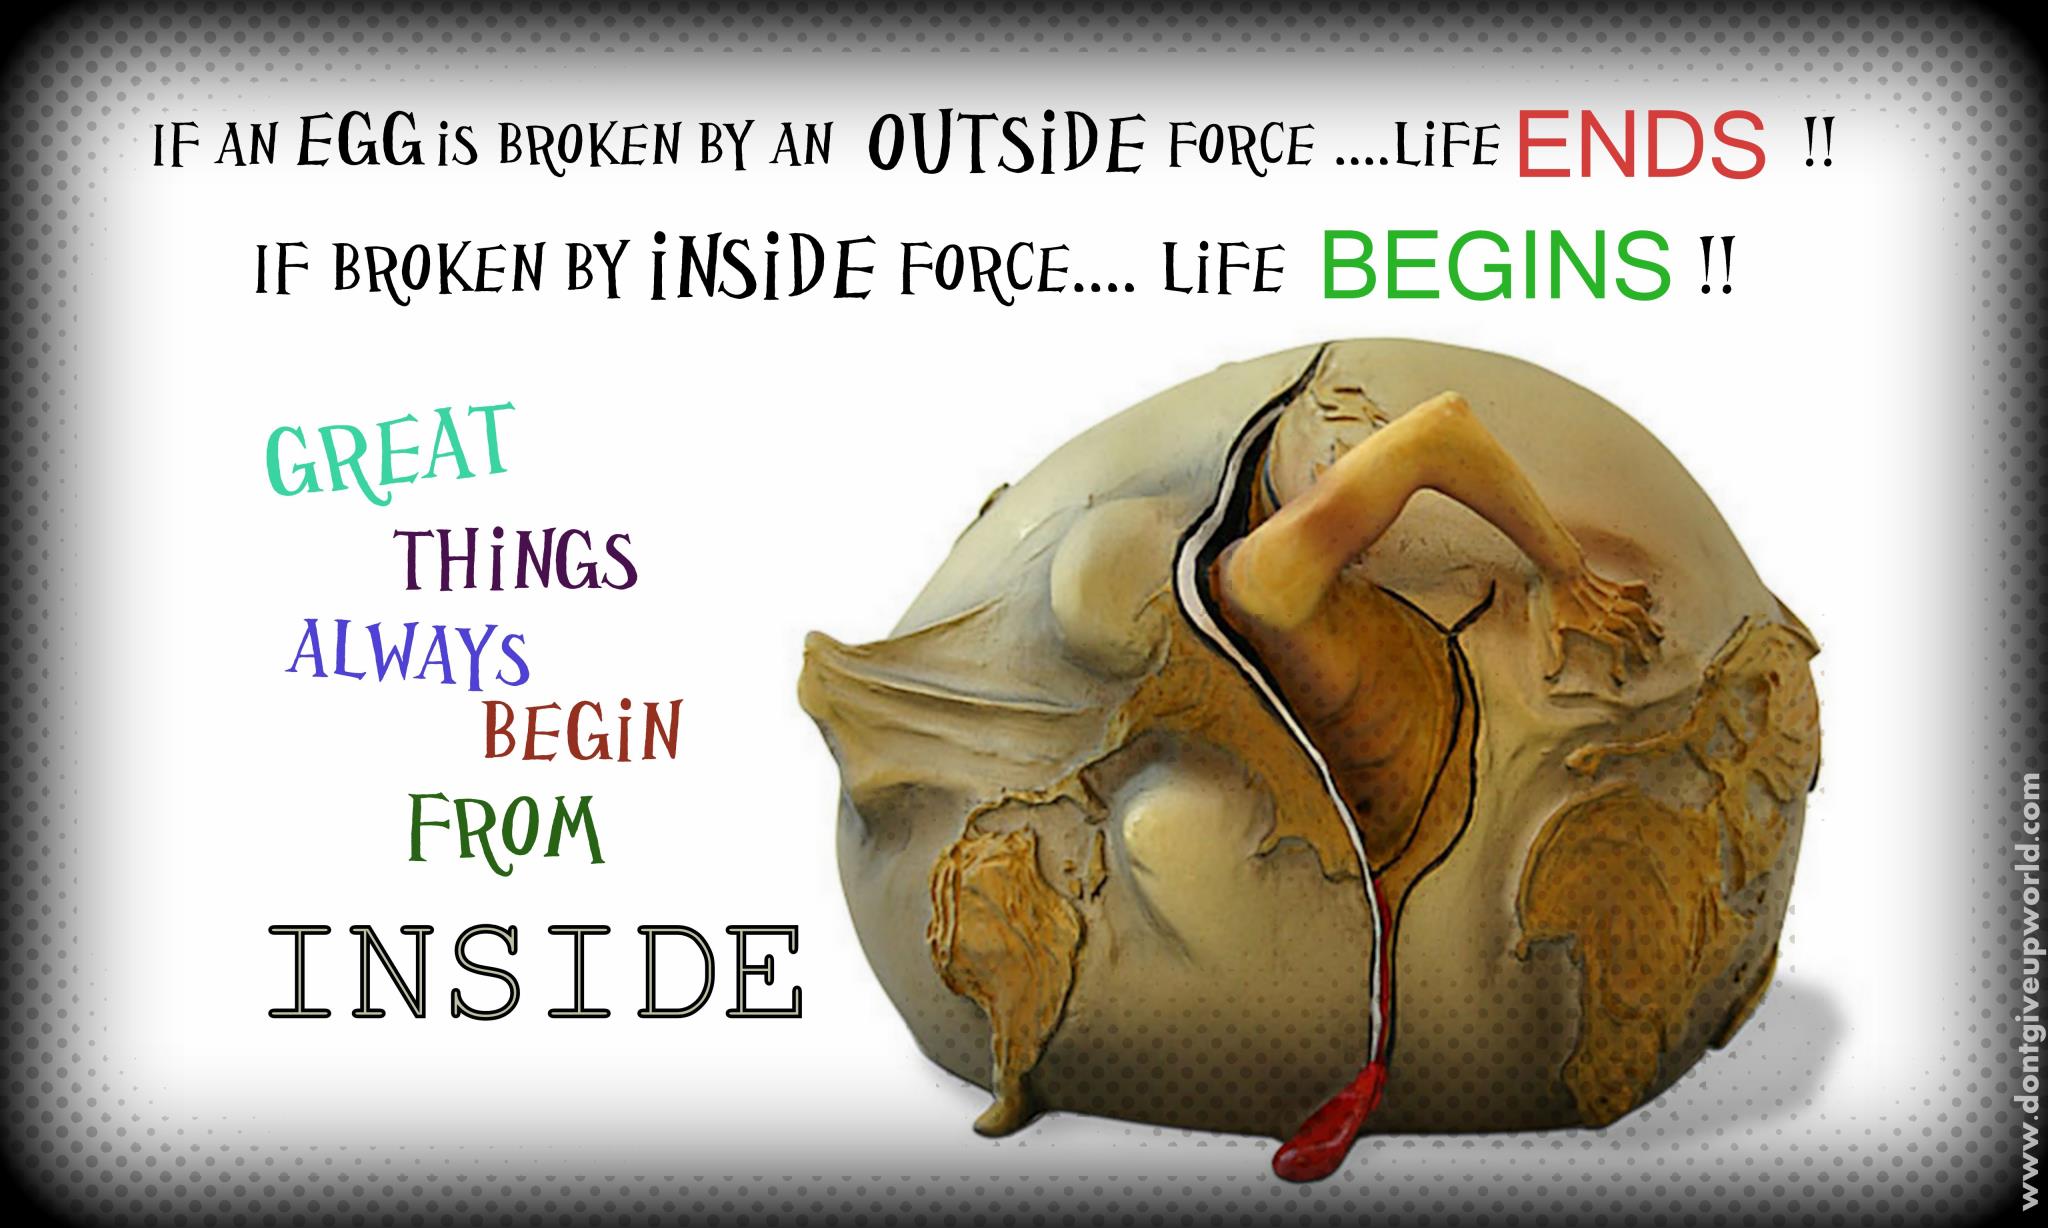 Our life and beginning. If an Egg is broken by inside Force Life begins. Our Life beginnings and always. Broken inside.